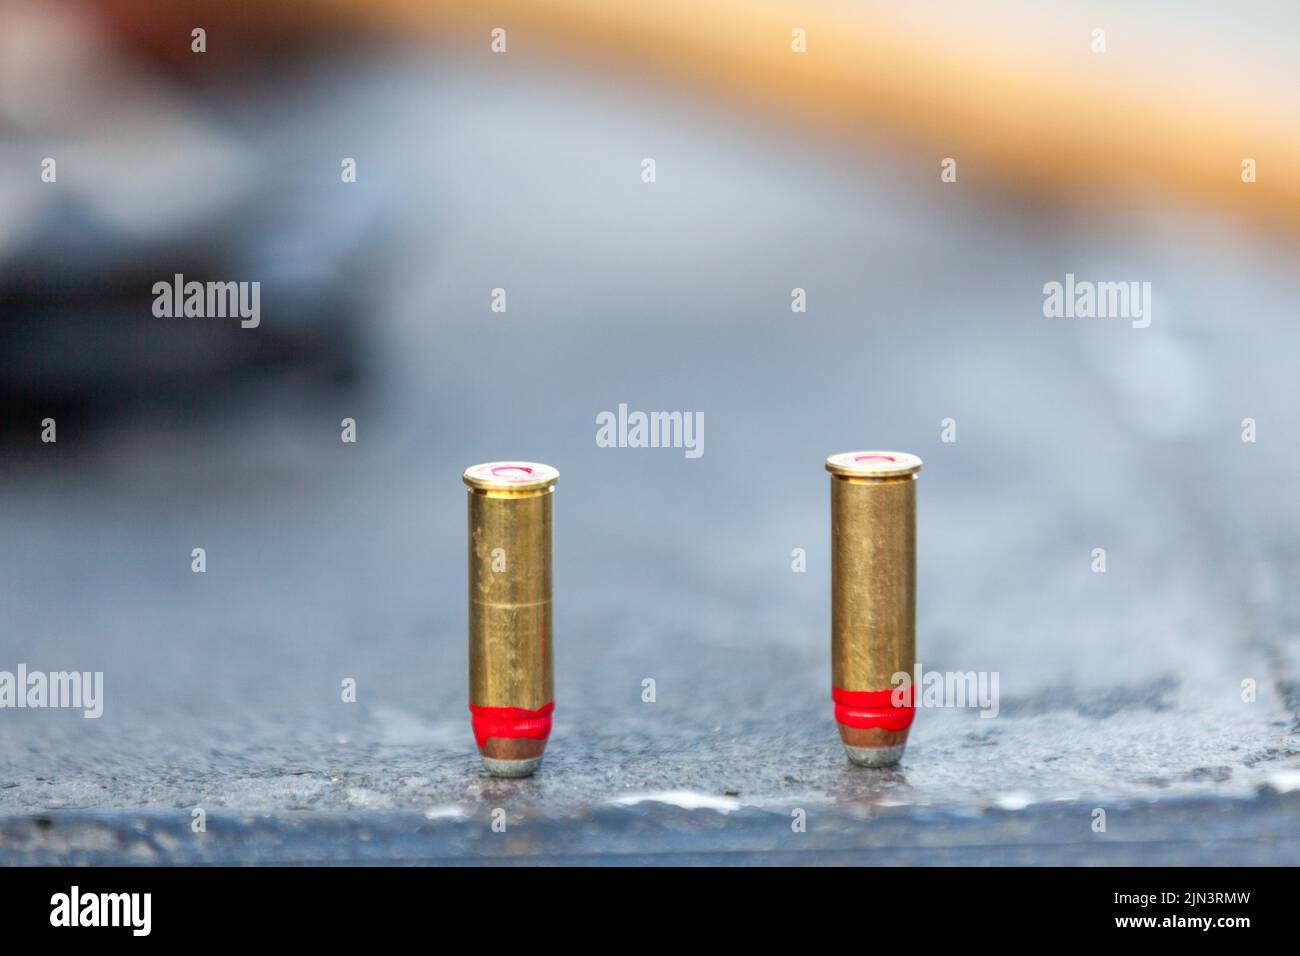 A line of red nail polish dries on a bullet to help waterproof the ammo to use in a bang-stick during a nighttime alligator hunting expedition in Bowman, South Carolina. Alligator hunting in South Carolina is limited by lottery and a four week season once a year. Stock Photo